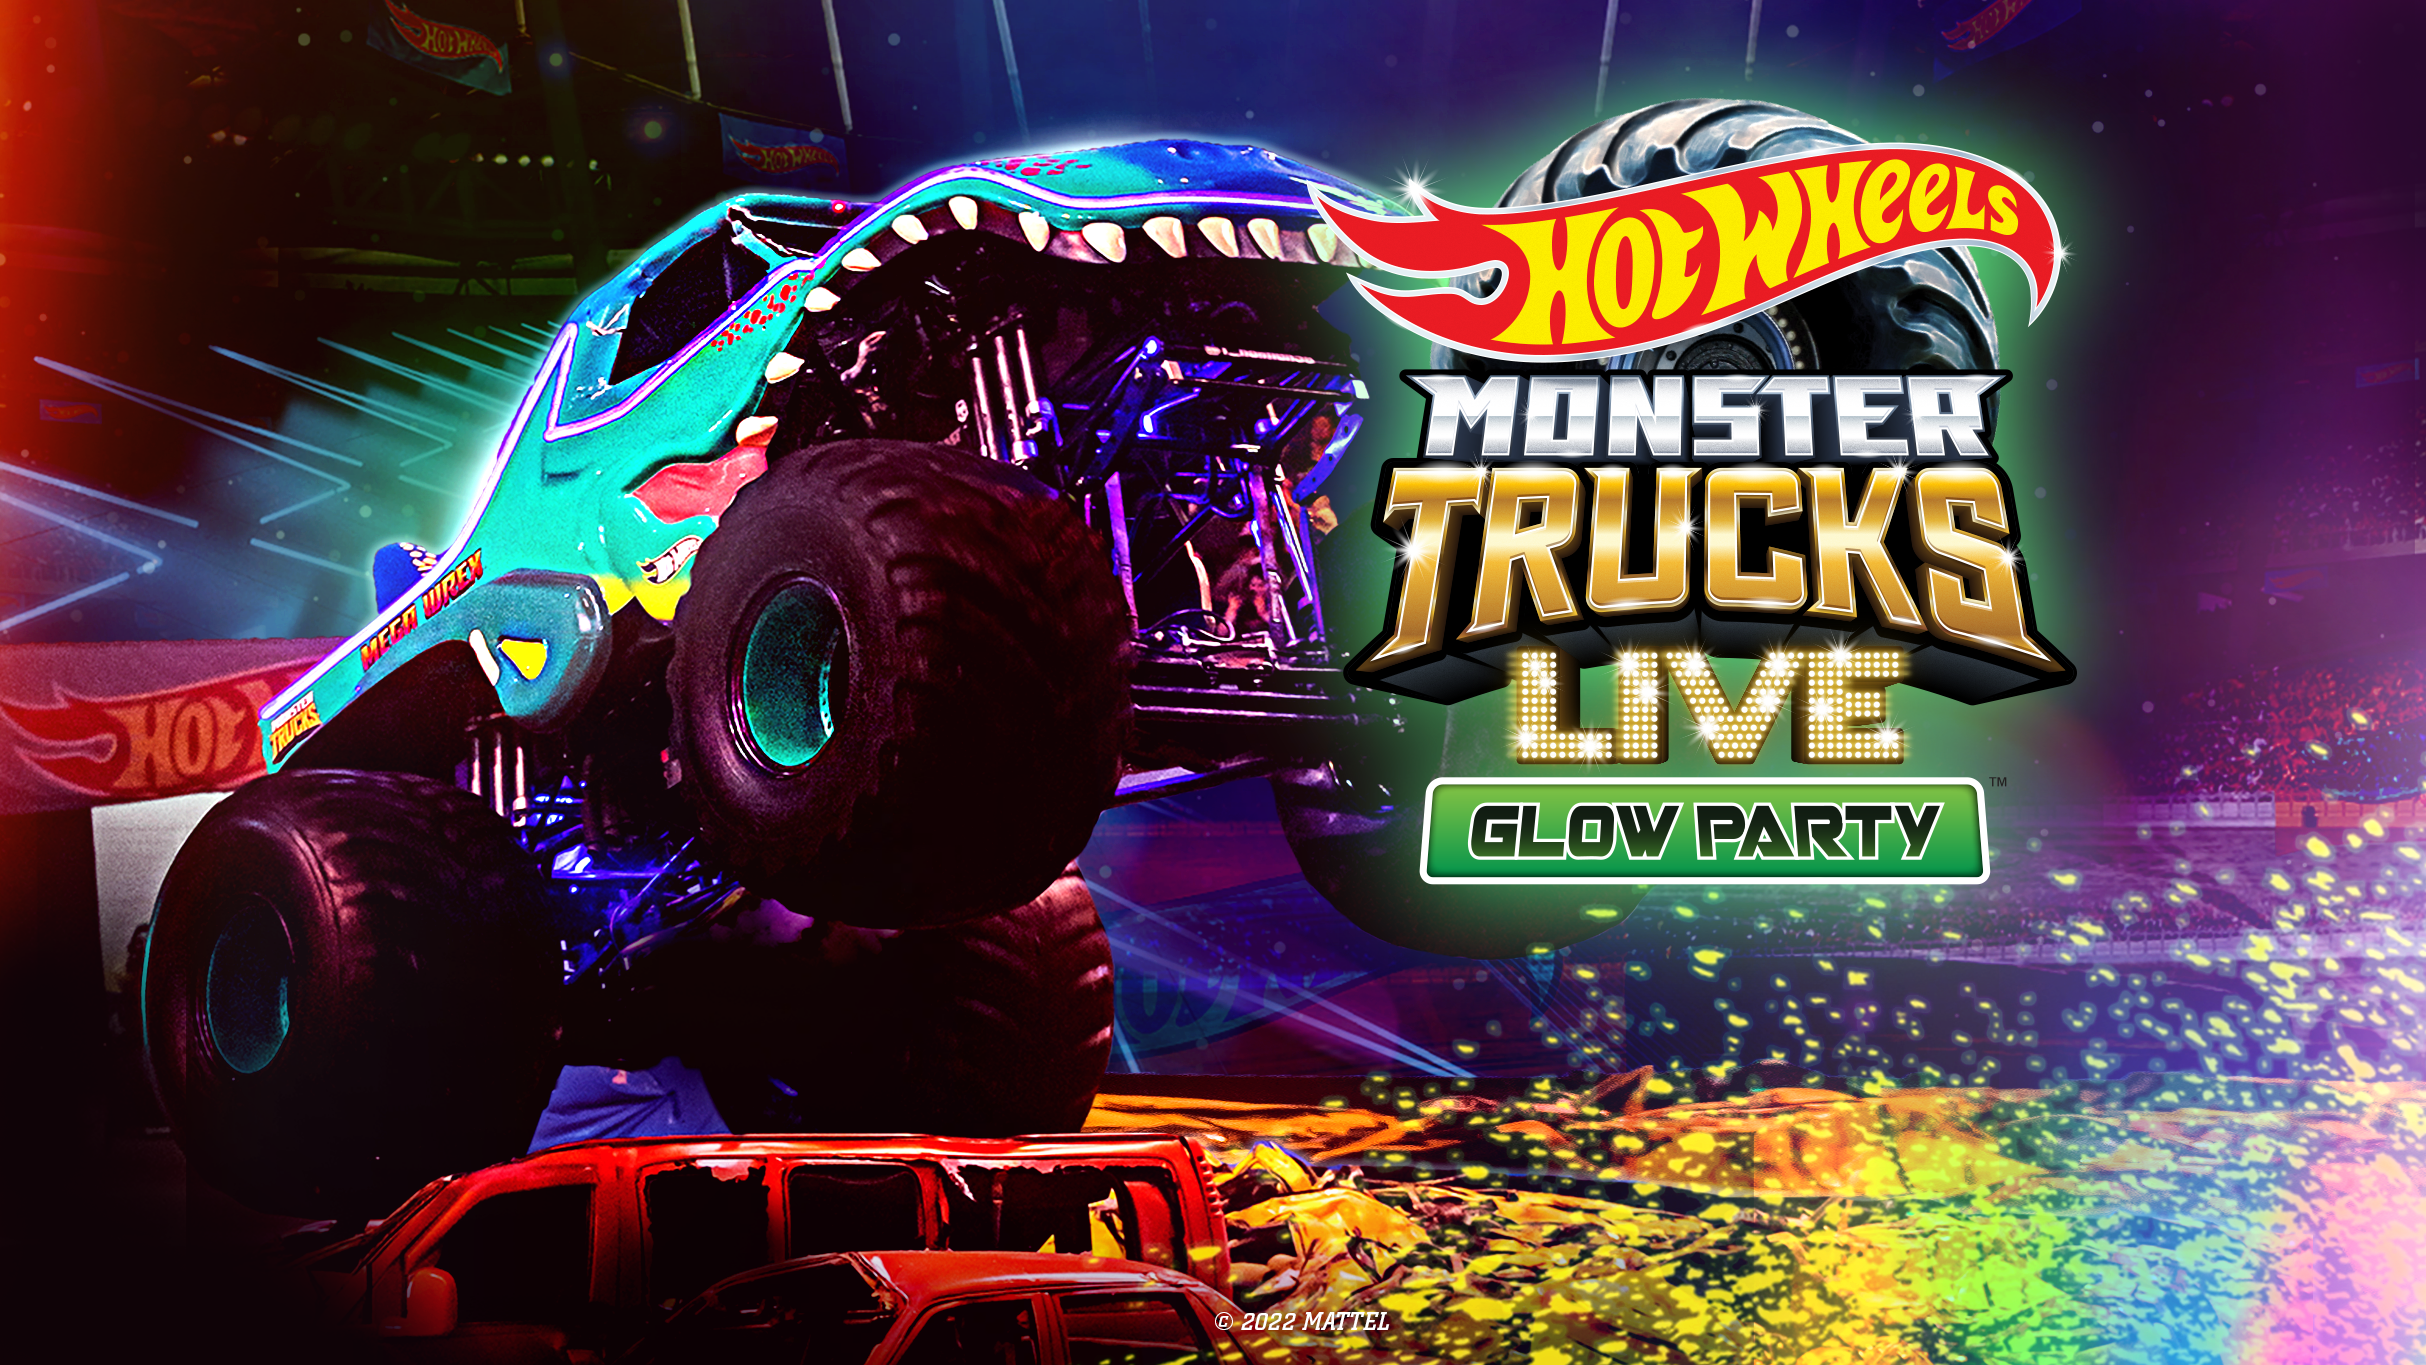 Hot Wheels Monster Trucks Live Glow Party free presale code for show tickets in Council Bluffs, IA (Mid-America Center)